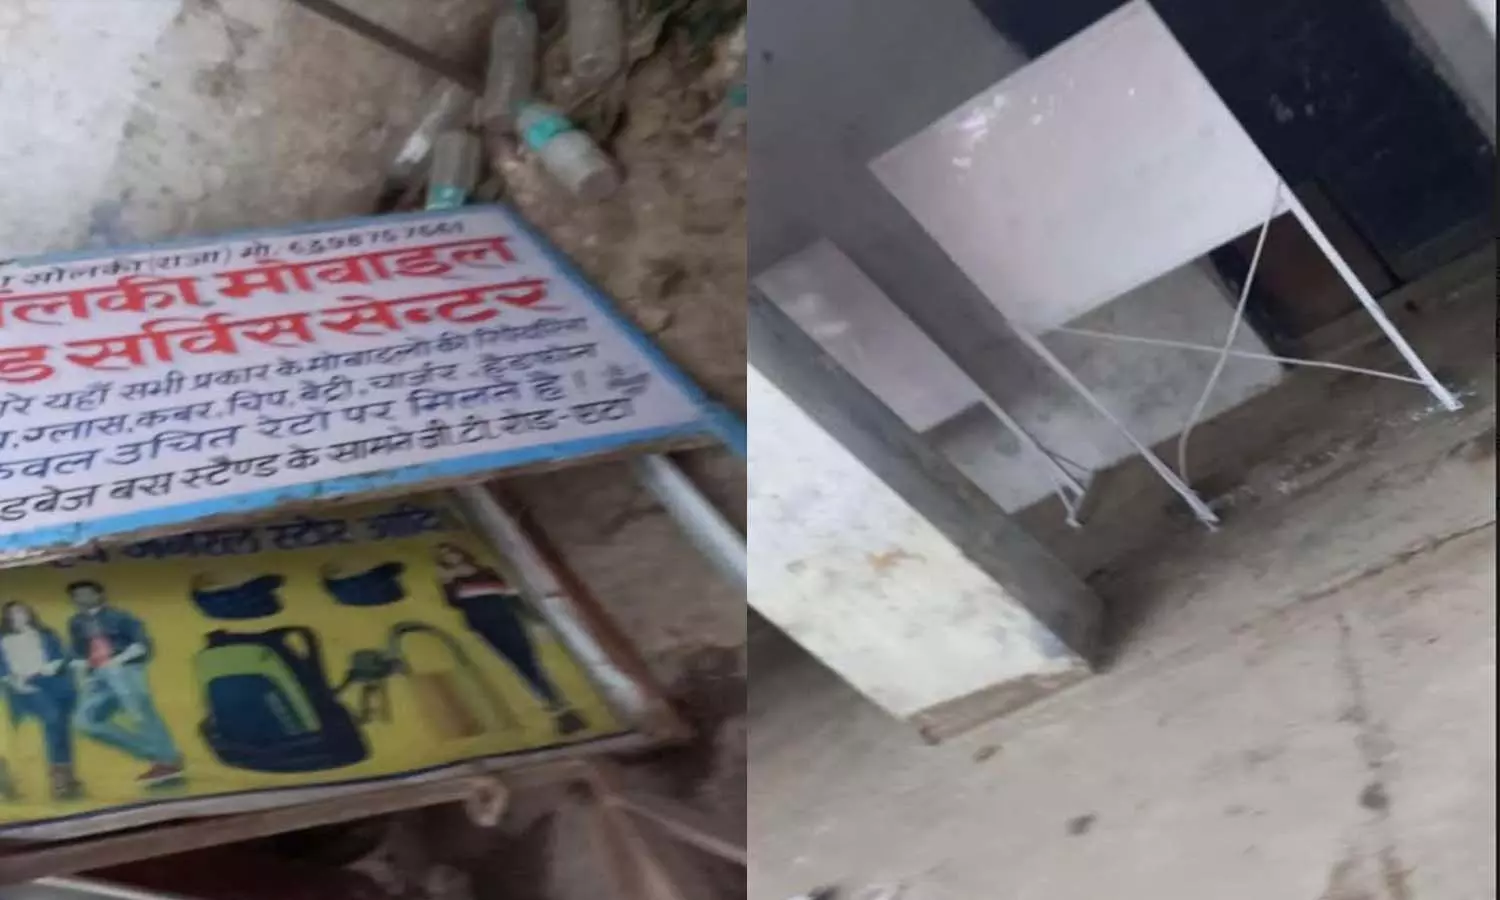 In Etah district, in the name of removing encroachment, the police-municipal administration raised the boards of shopkeepersIn Etah district, in the name of removing encroachment, the police-municipal administration raised the boards of shopkeepers